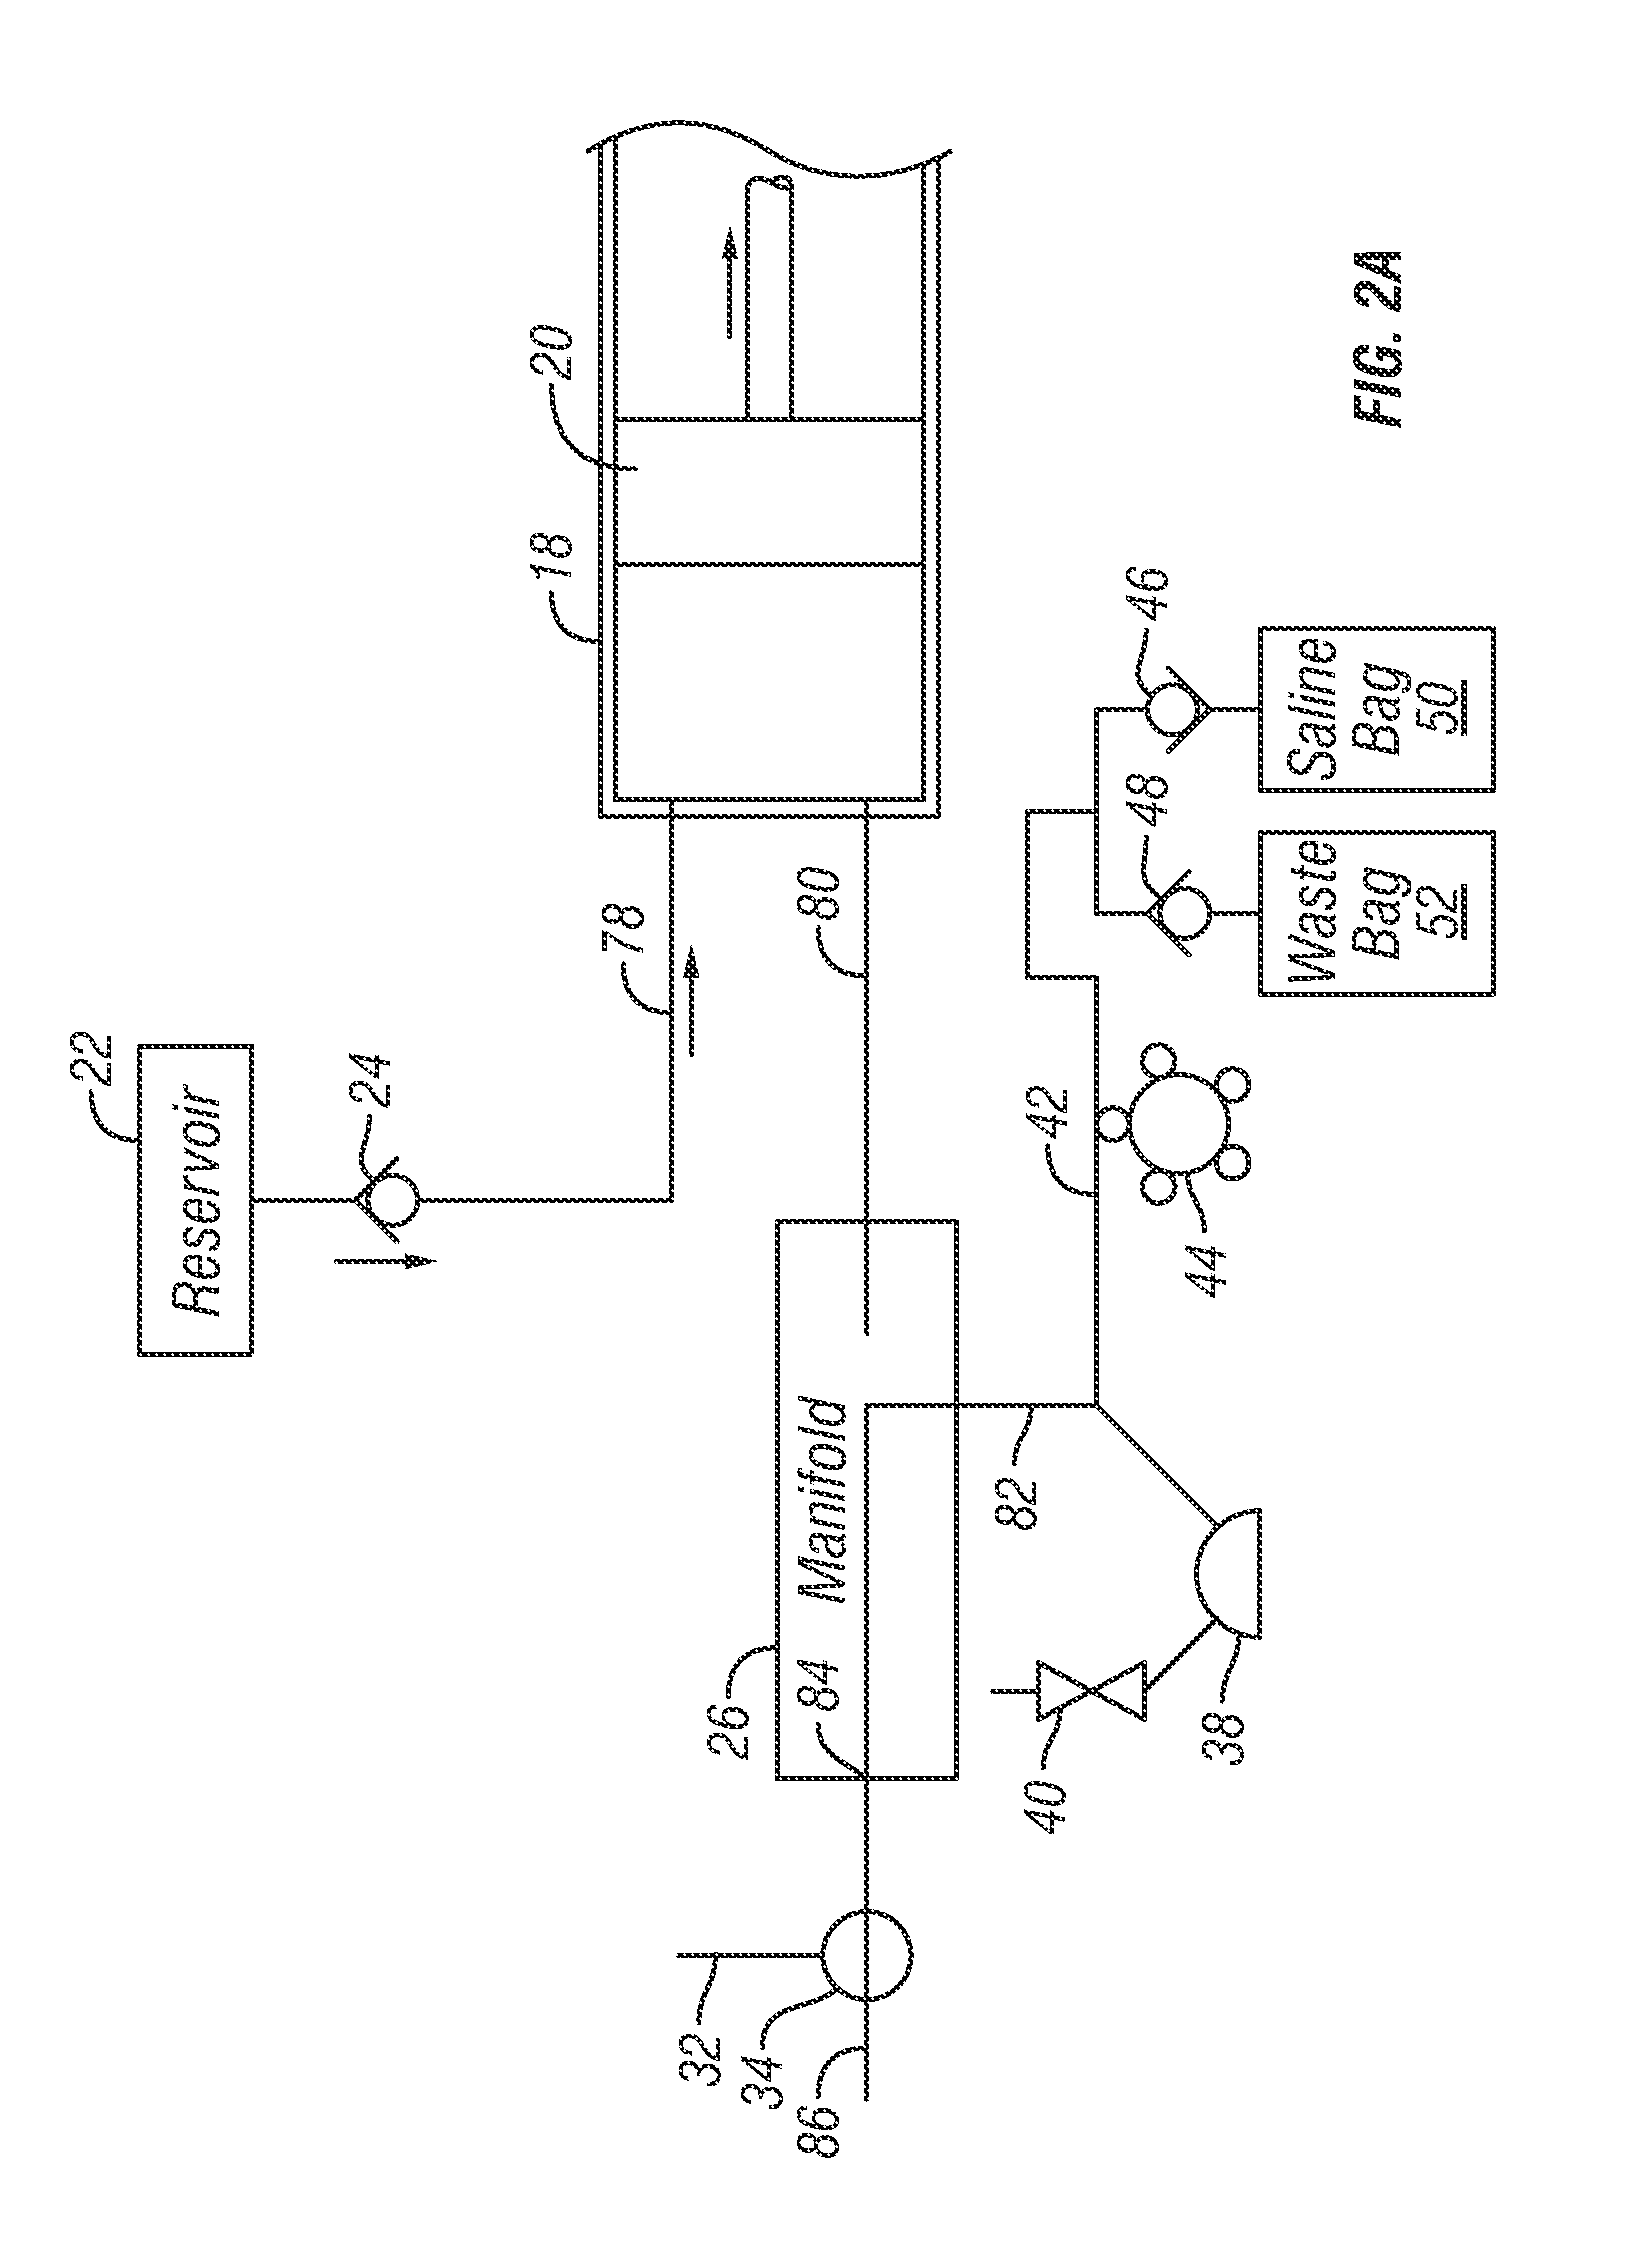 System and method for multiple injection procedures on heart vessels